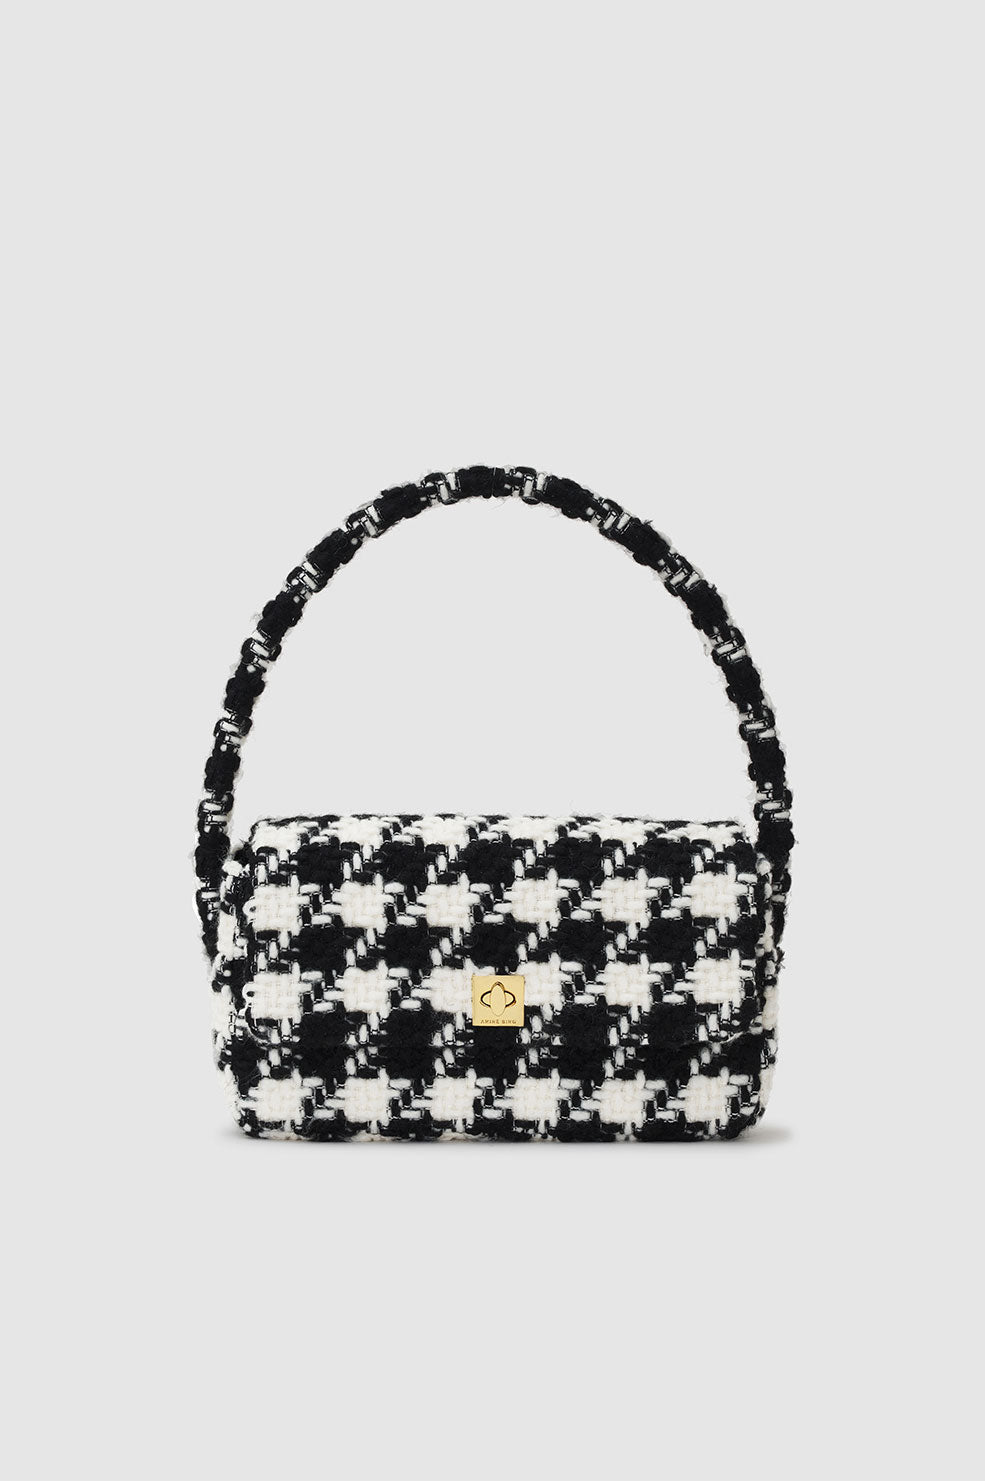 ANINE BING Nico Bag - Black And White Houndstooth - Front View